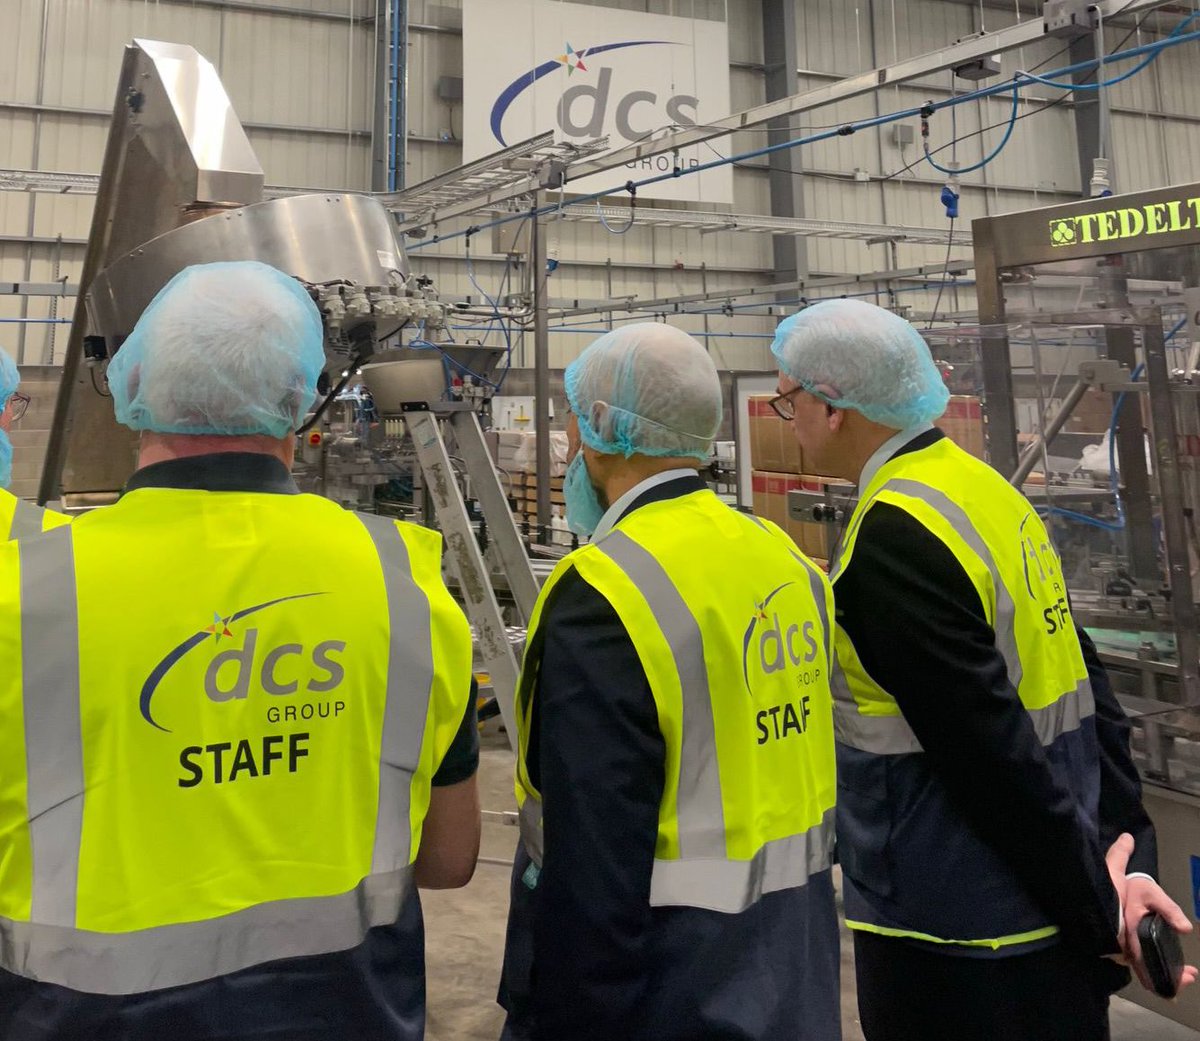 Delighted to visit @dcsgroupuk at their manufacturing site. Great to discuss how their investment will help boost local growth and support jobs in #BromsgroveDistrict